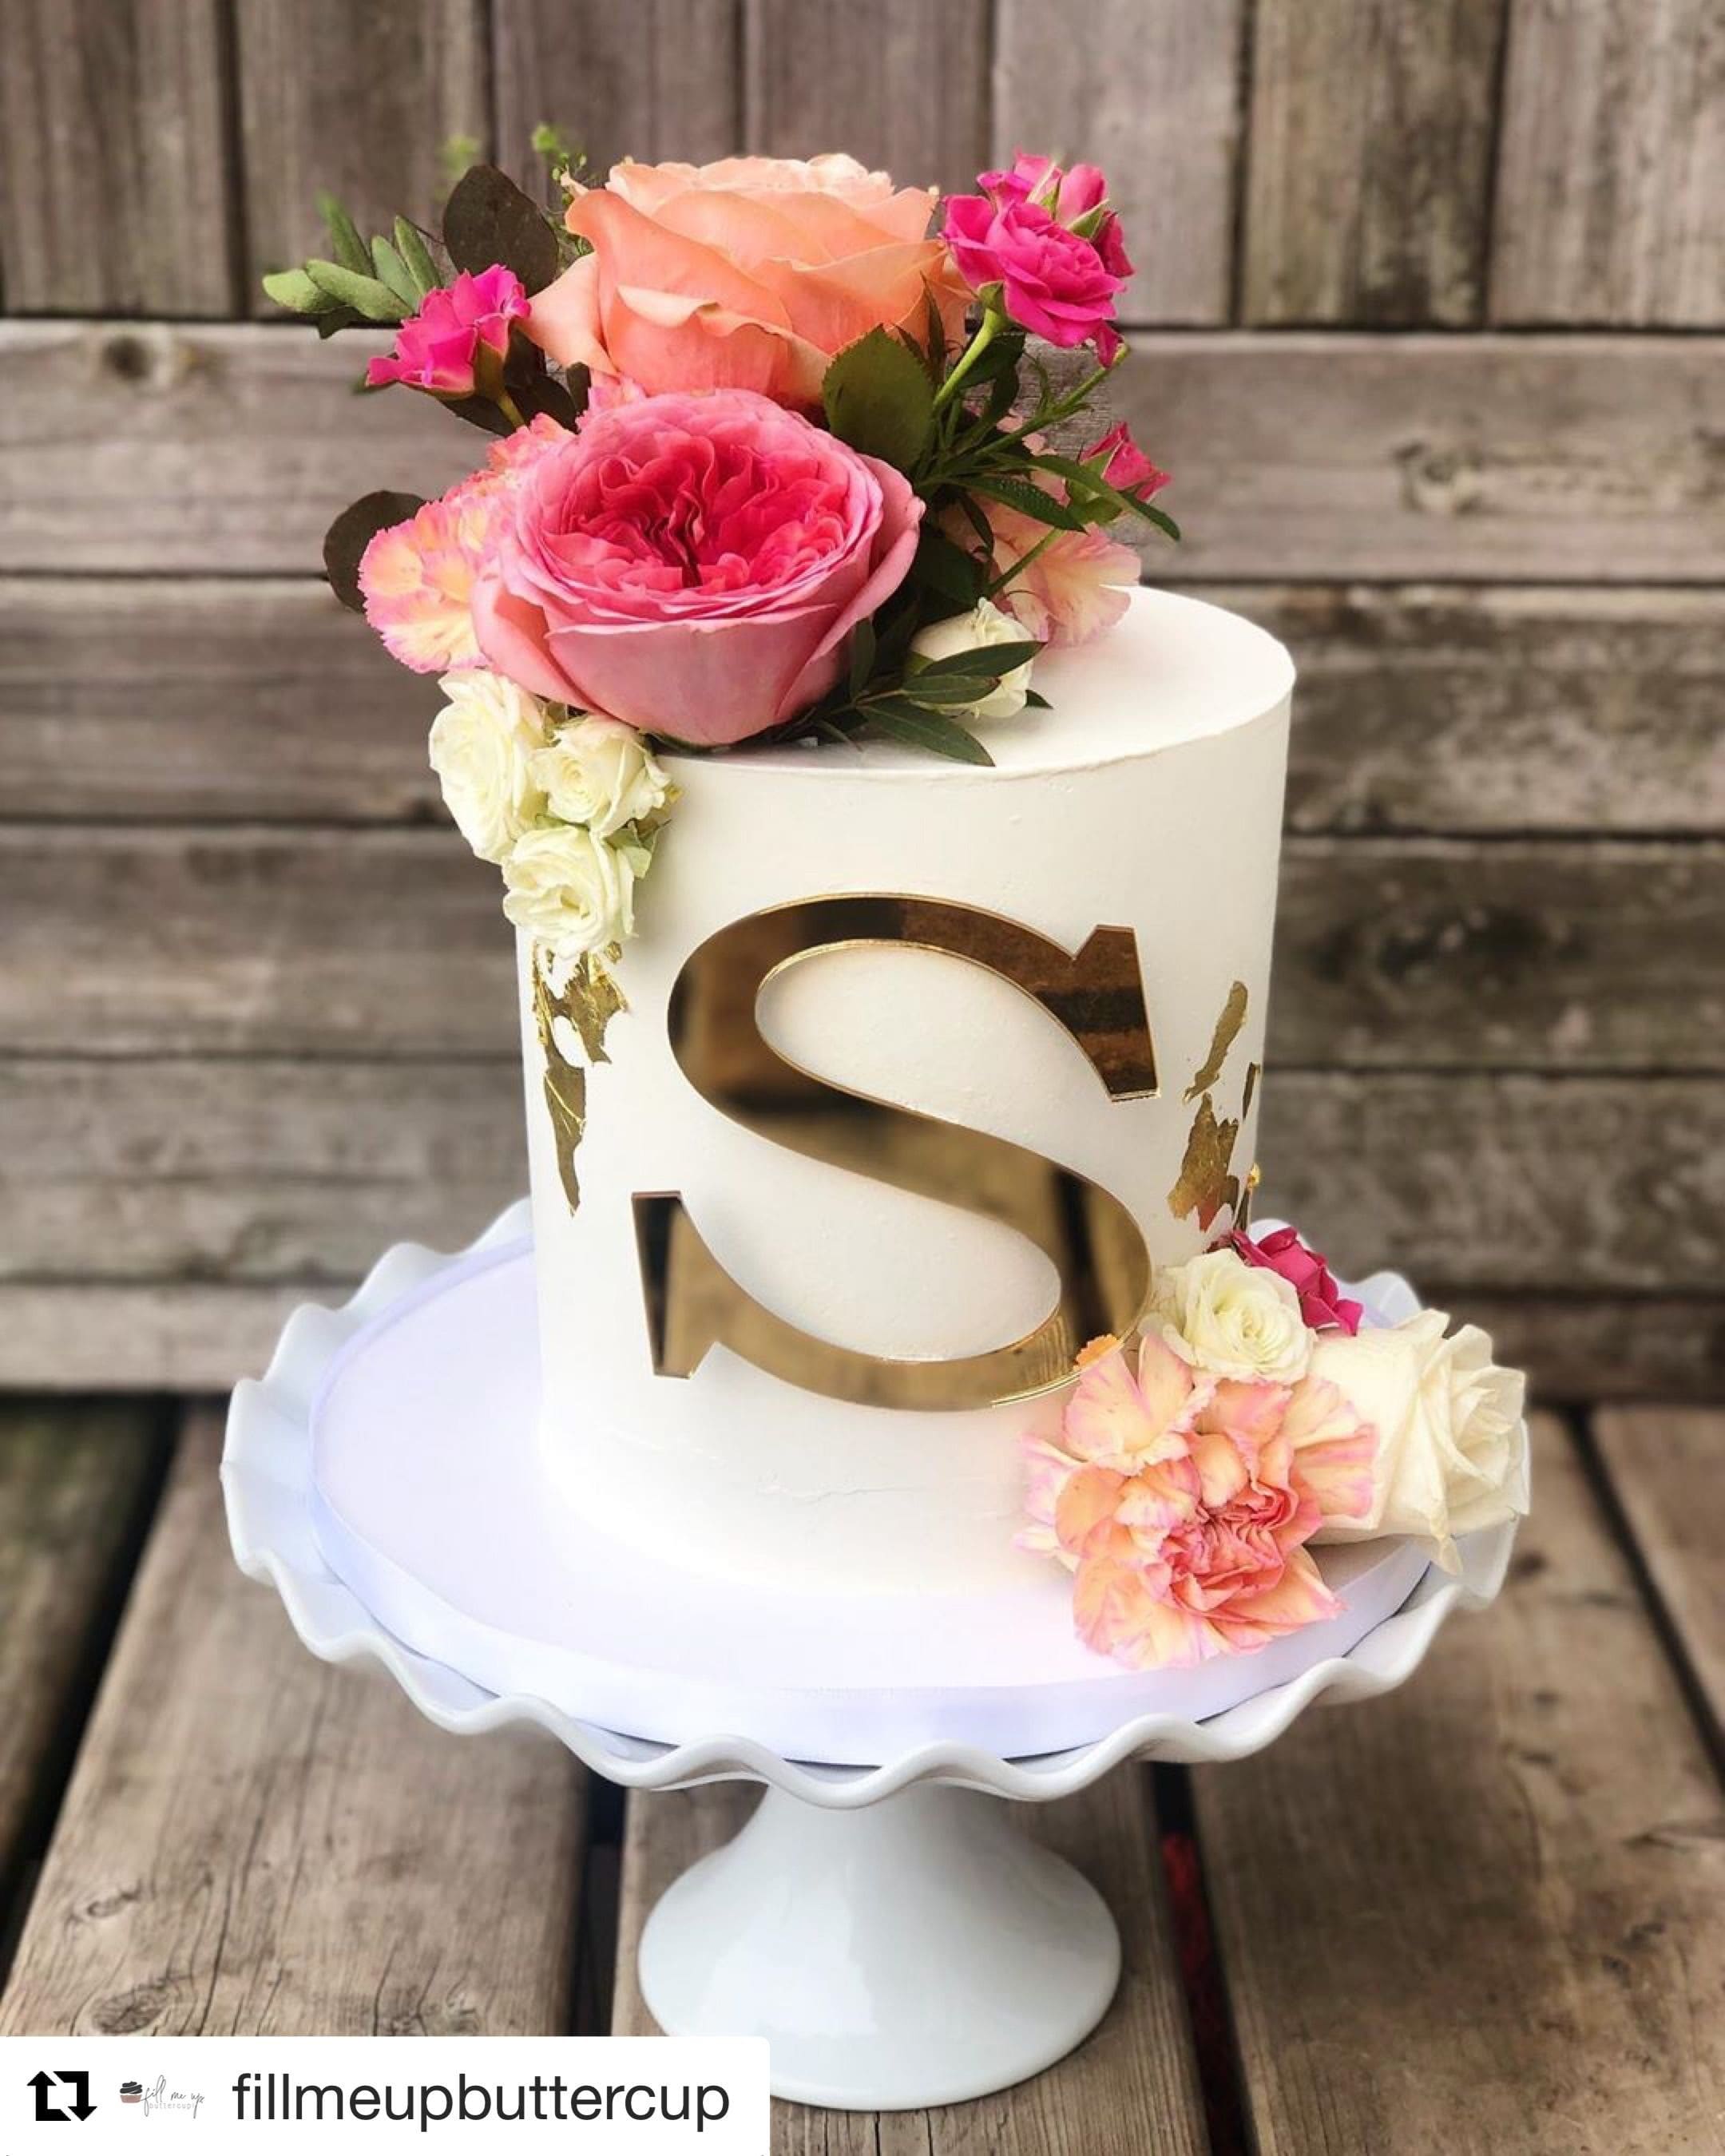 Monogram: Gold Mirror Acrylic
Cake: Fill me up Buttercup